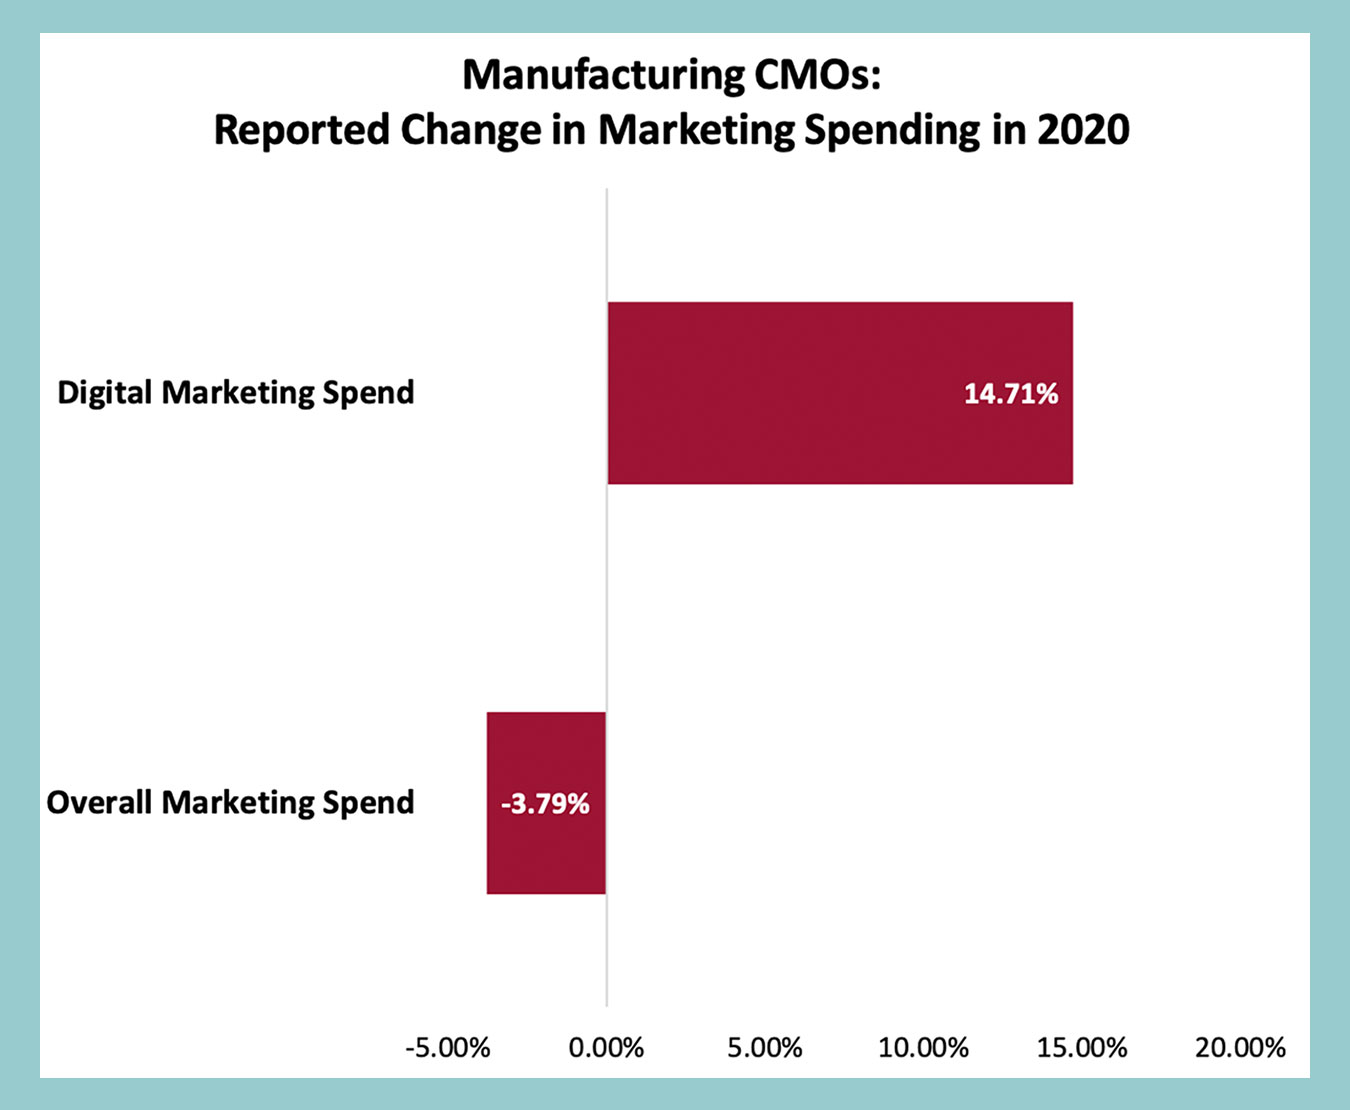 strategic manufacturing marketing ROI - manufacturers spent -3.79% less on marketing overall in 2020 and increased digital marketing spending 14.71%